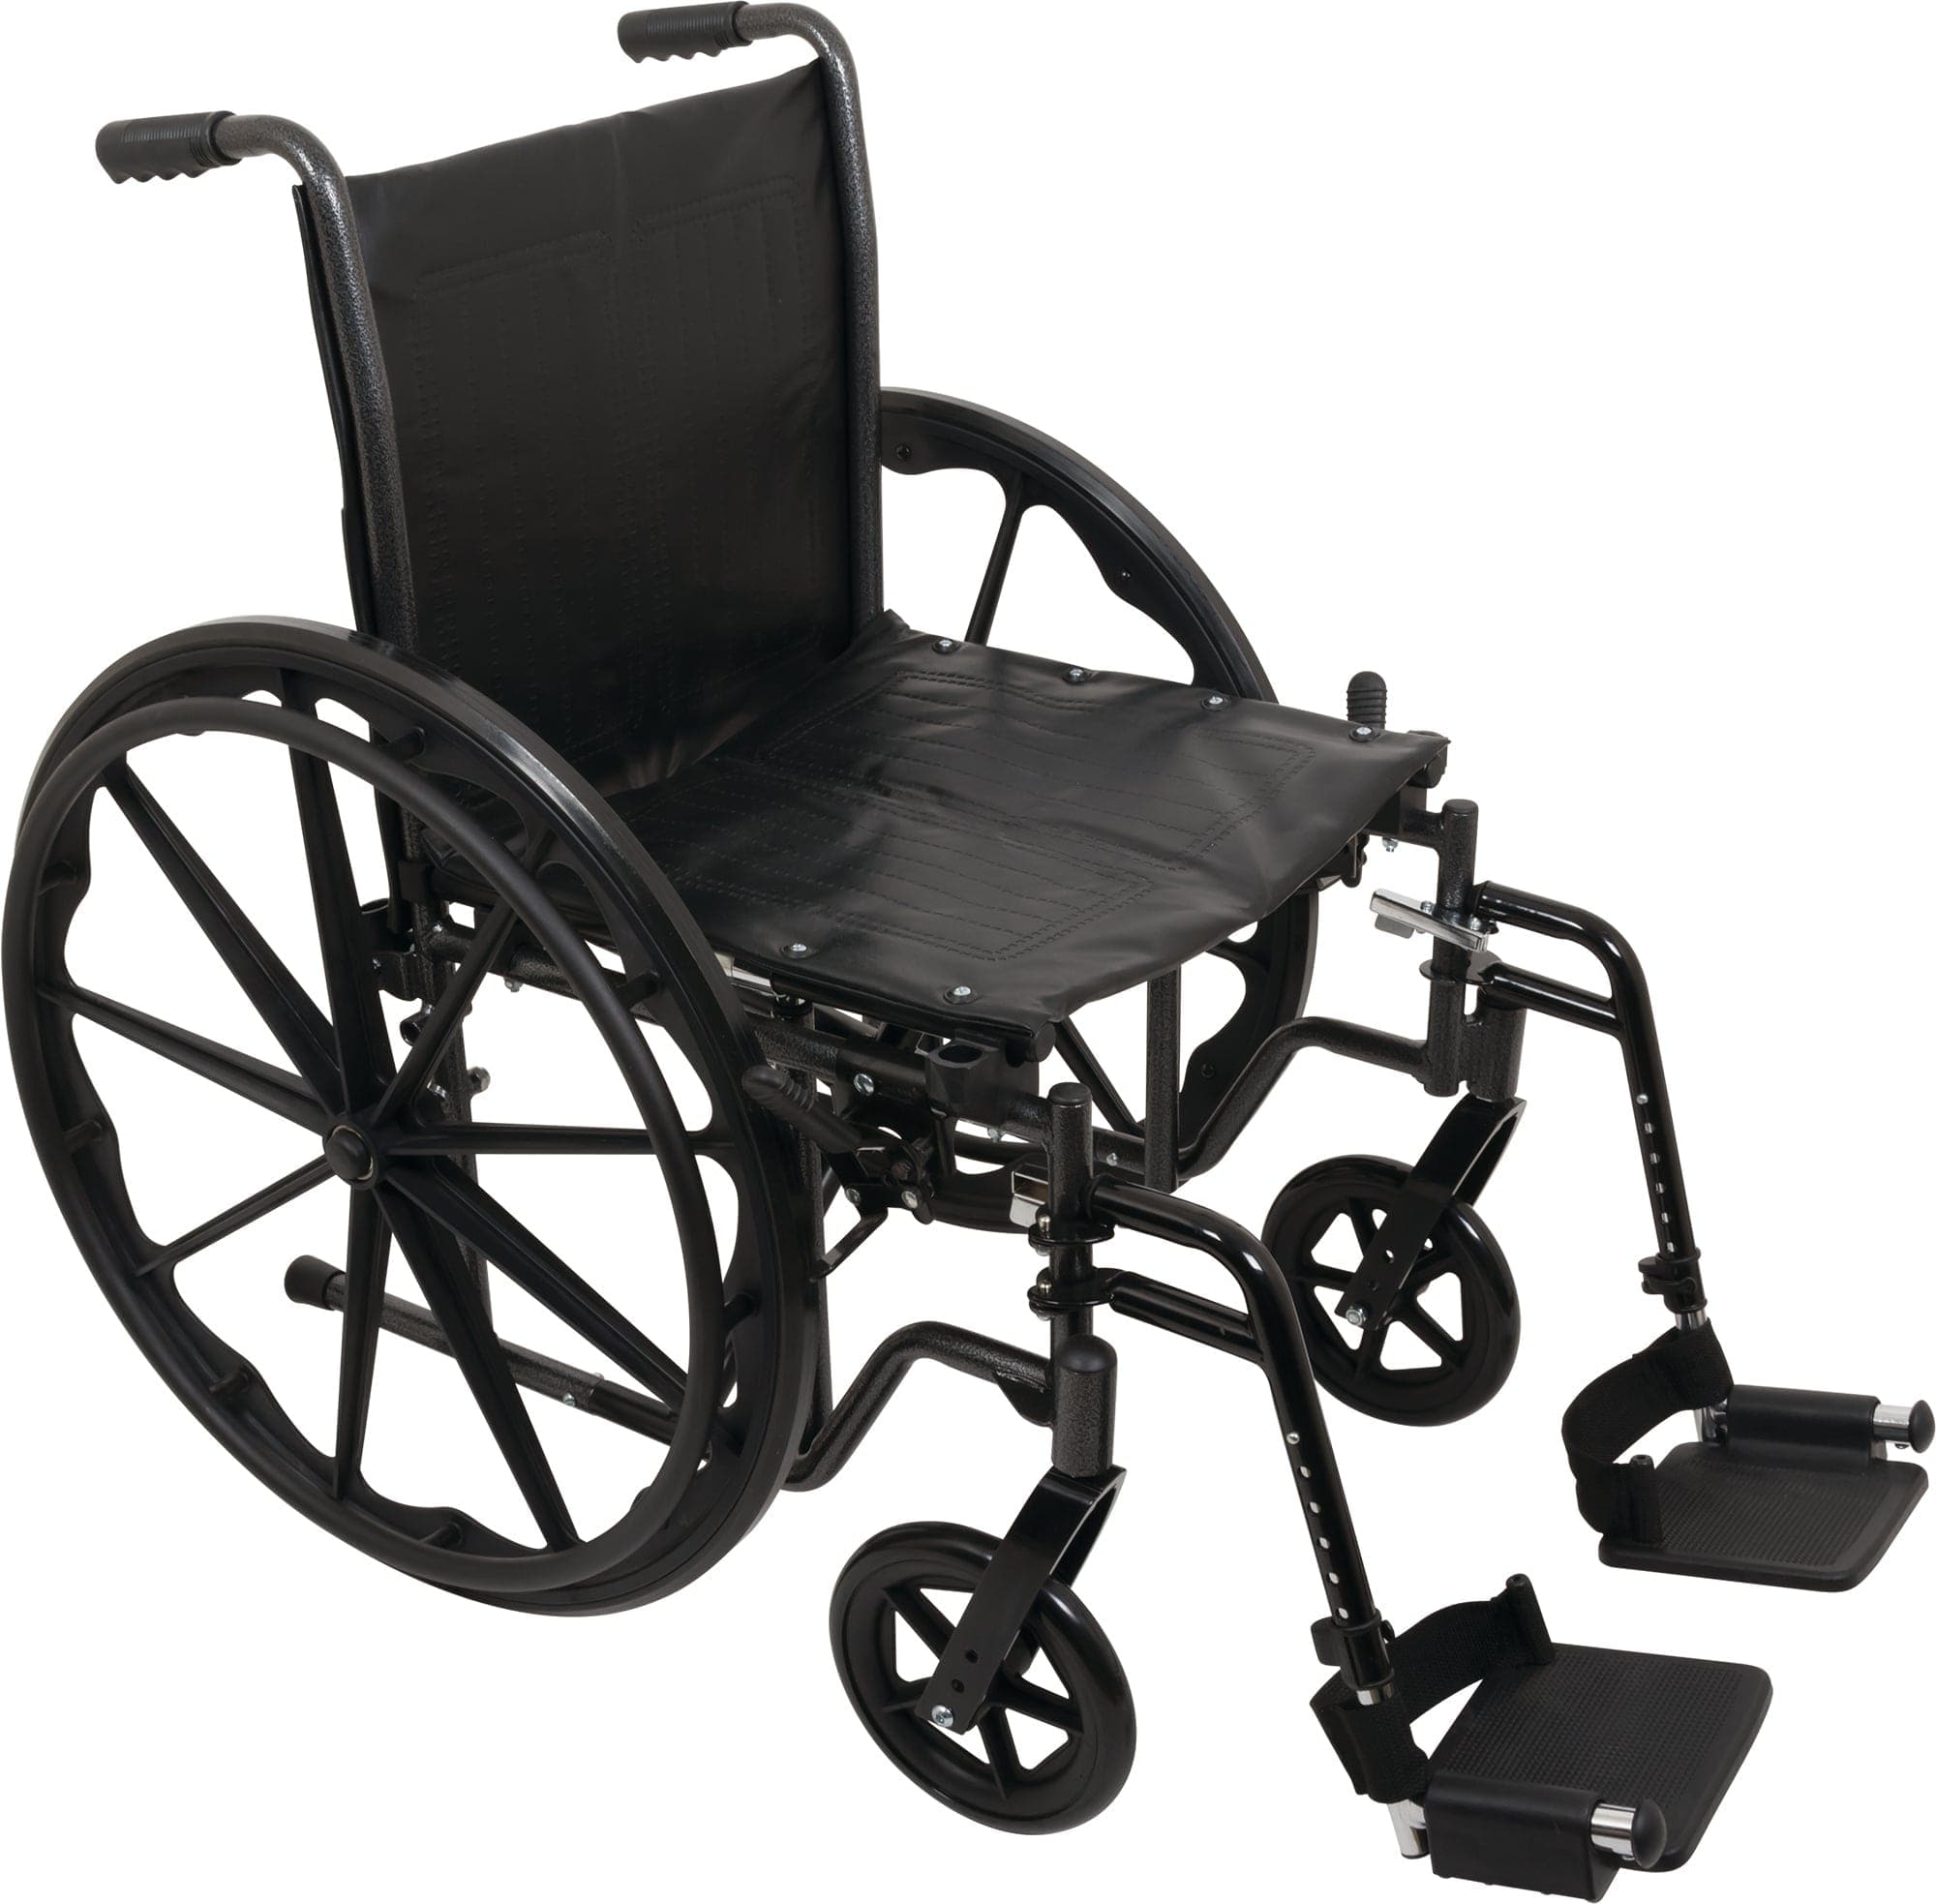 Compass Health K2 Wheelchairs Compass Health ProBasics K2 Wheelchair with 18" x 16" Seat and Swing-Away Footrests